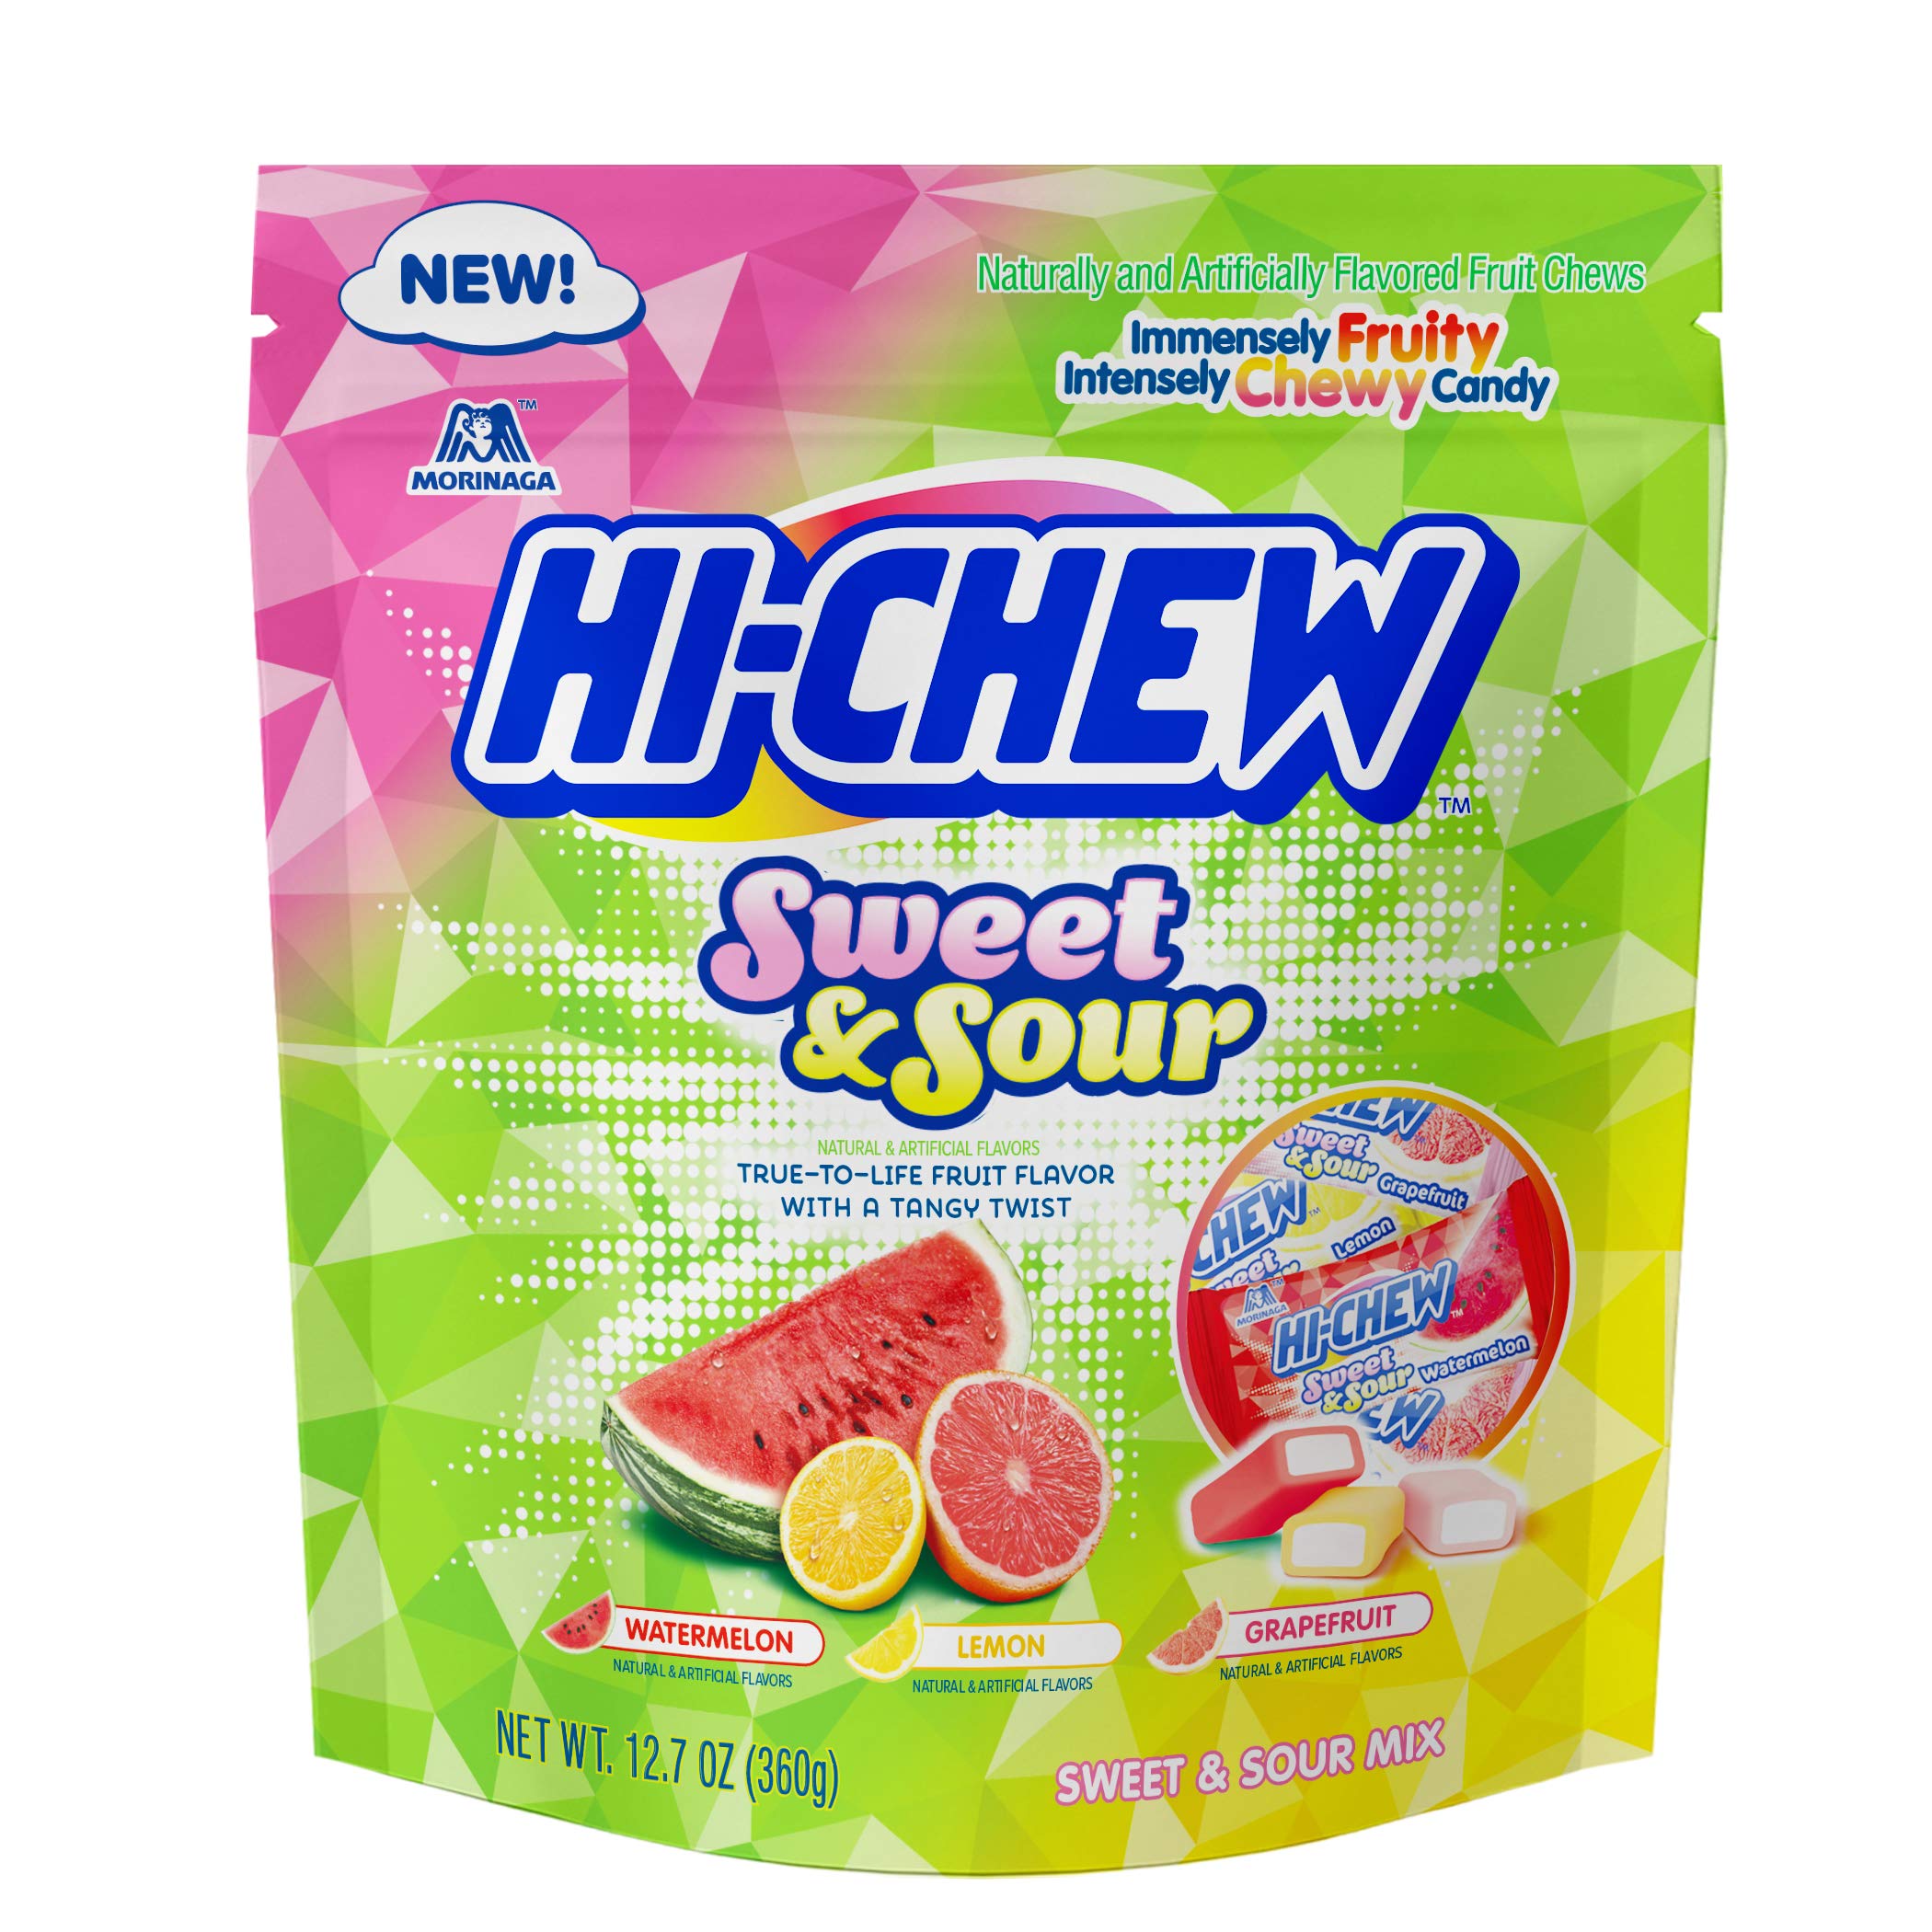 Hi-Chew Sensationally Chewy Japanese Fruit Candy, Sweet & Sour Mix, 12.7 oz, 4Count